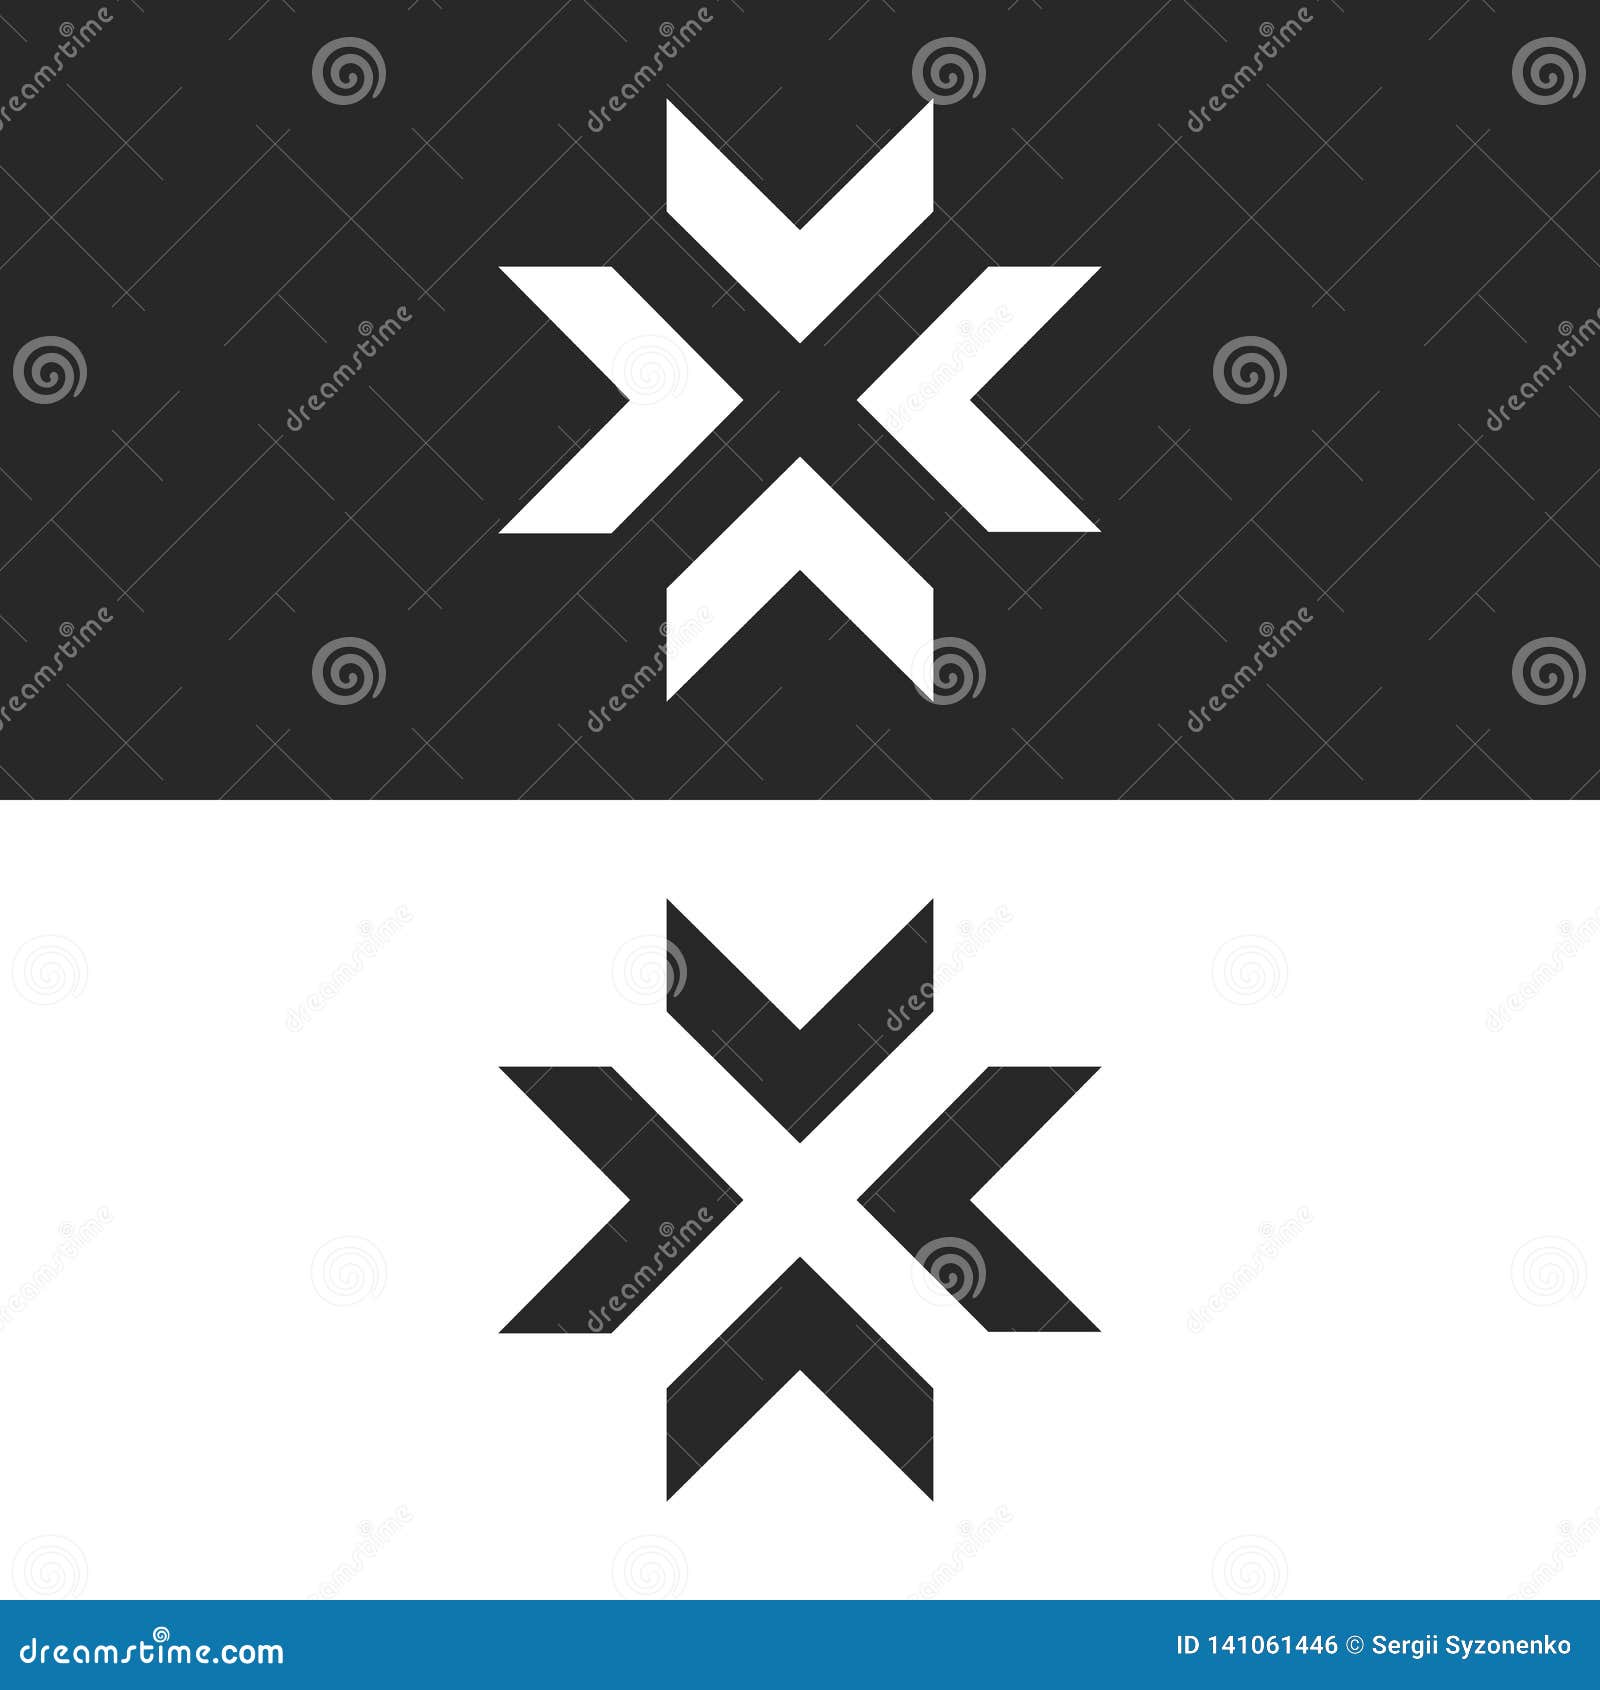 converge arrows logo mockup, letter x  black and white graphic concept, intersection 4 directions in center crossroad